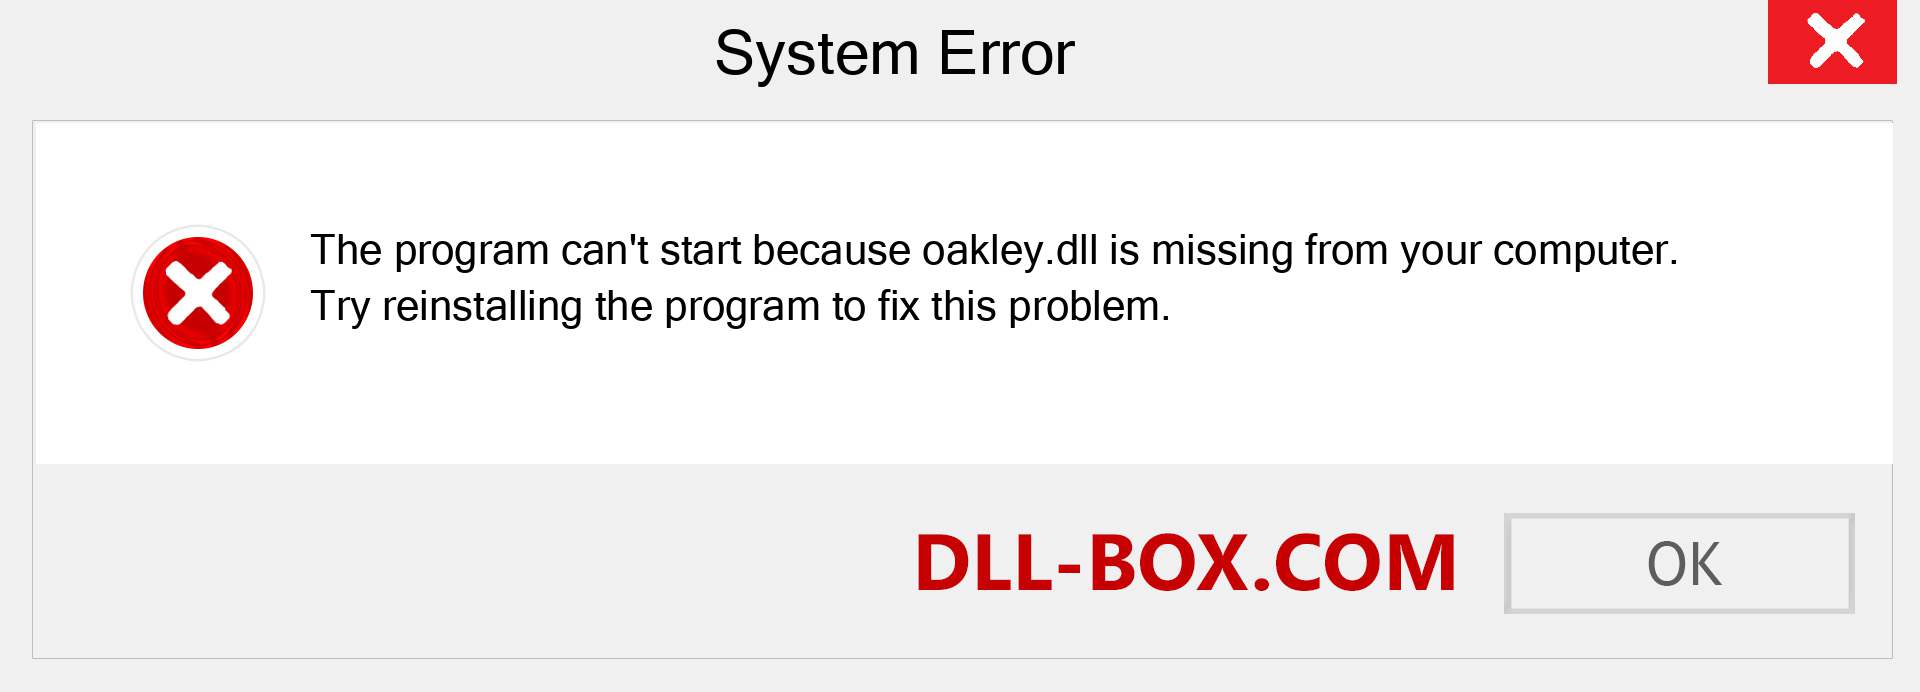  oakley.dll file is missing?. Download for Windows 7, 8, 10 - Fix  oakley dll Missing Error on Windows, photos, images